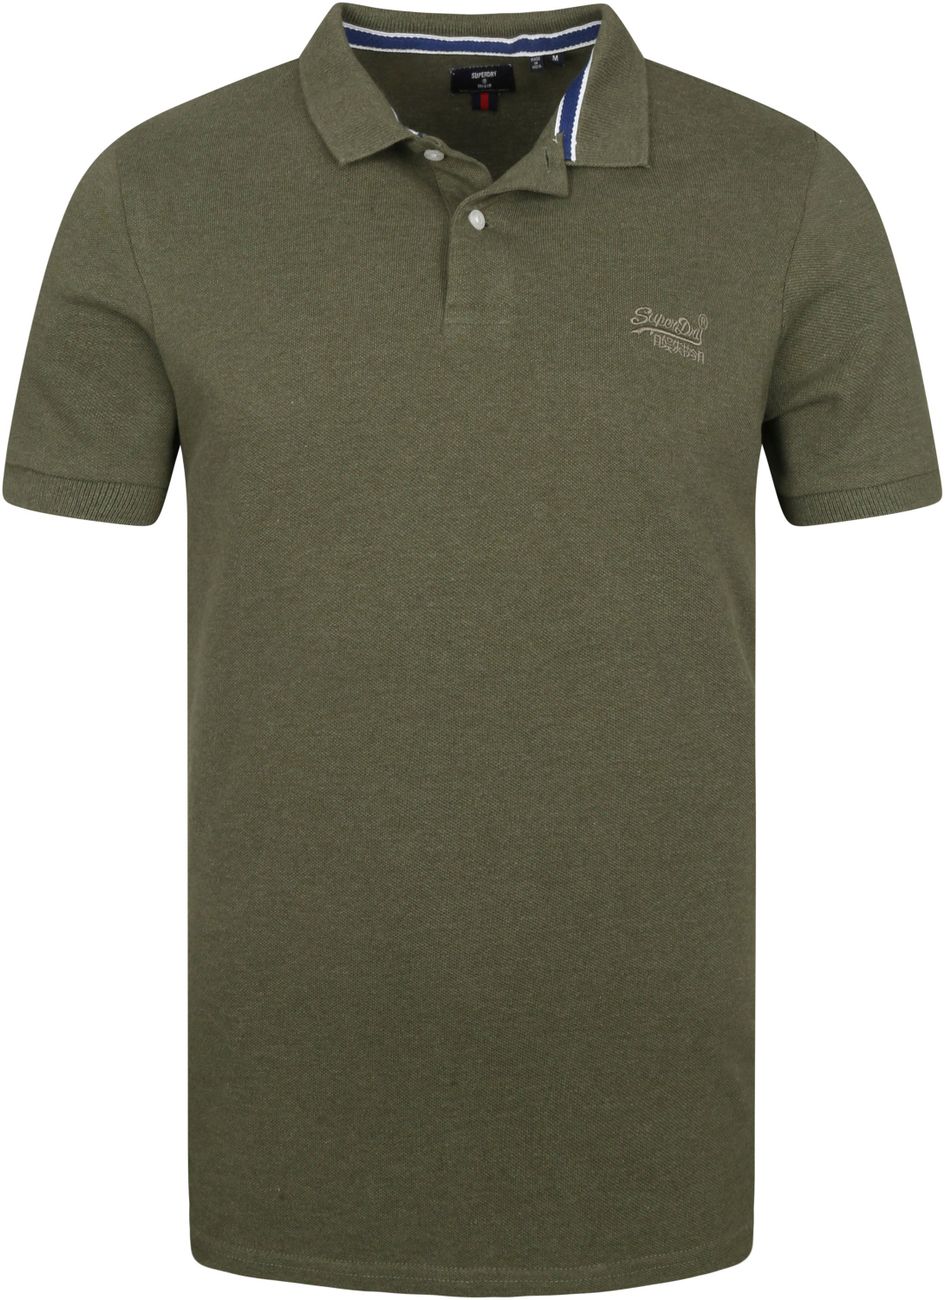 SUPERDRY CLASSIC PIQUE GREEN Noels – POLO Menswear